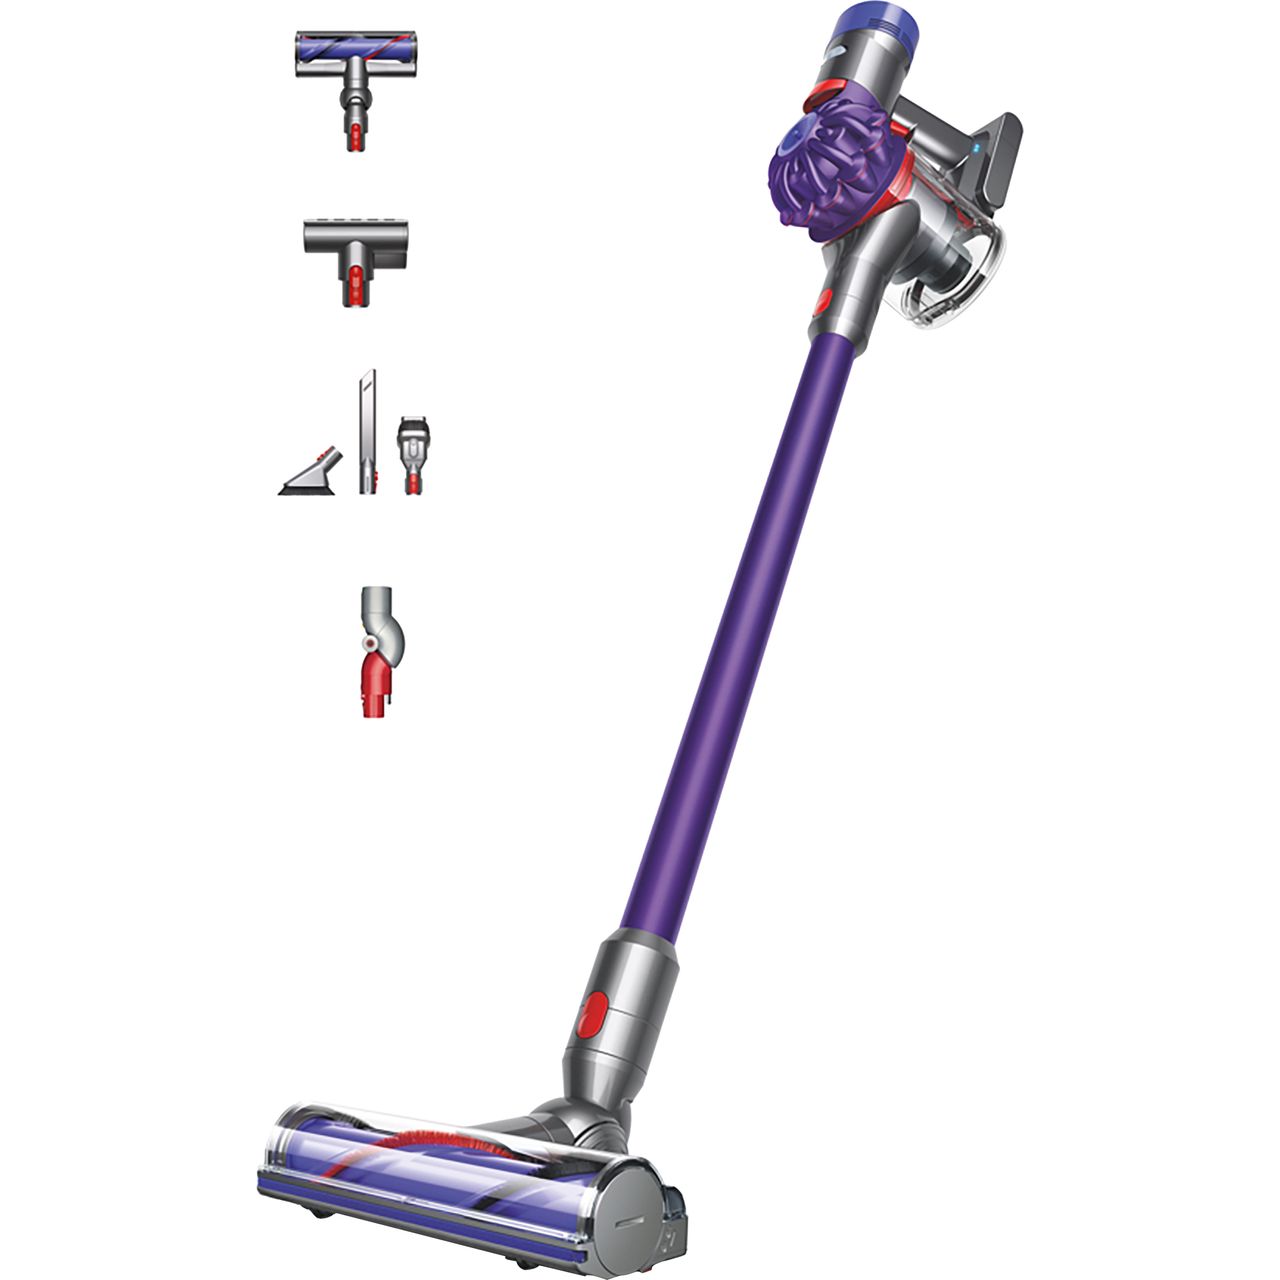 V7 Dyson V7 Animal Cordless Vacuum Cleaner with up to 30 Minutes Run Time Review